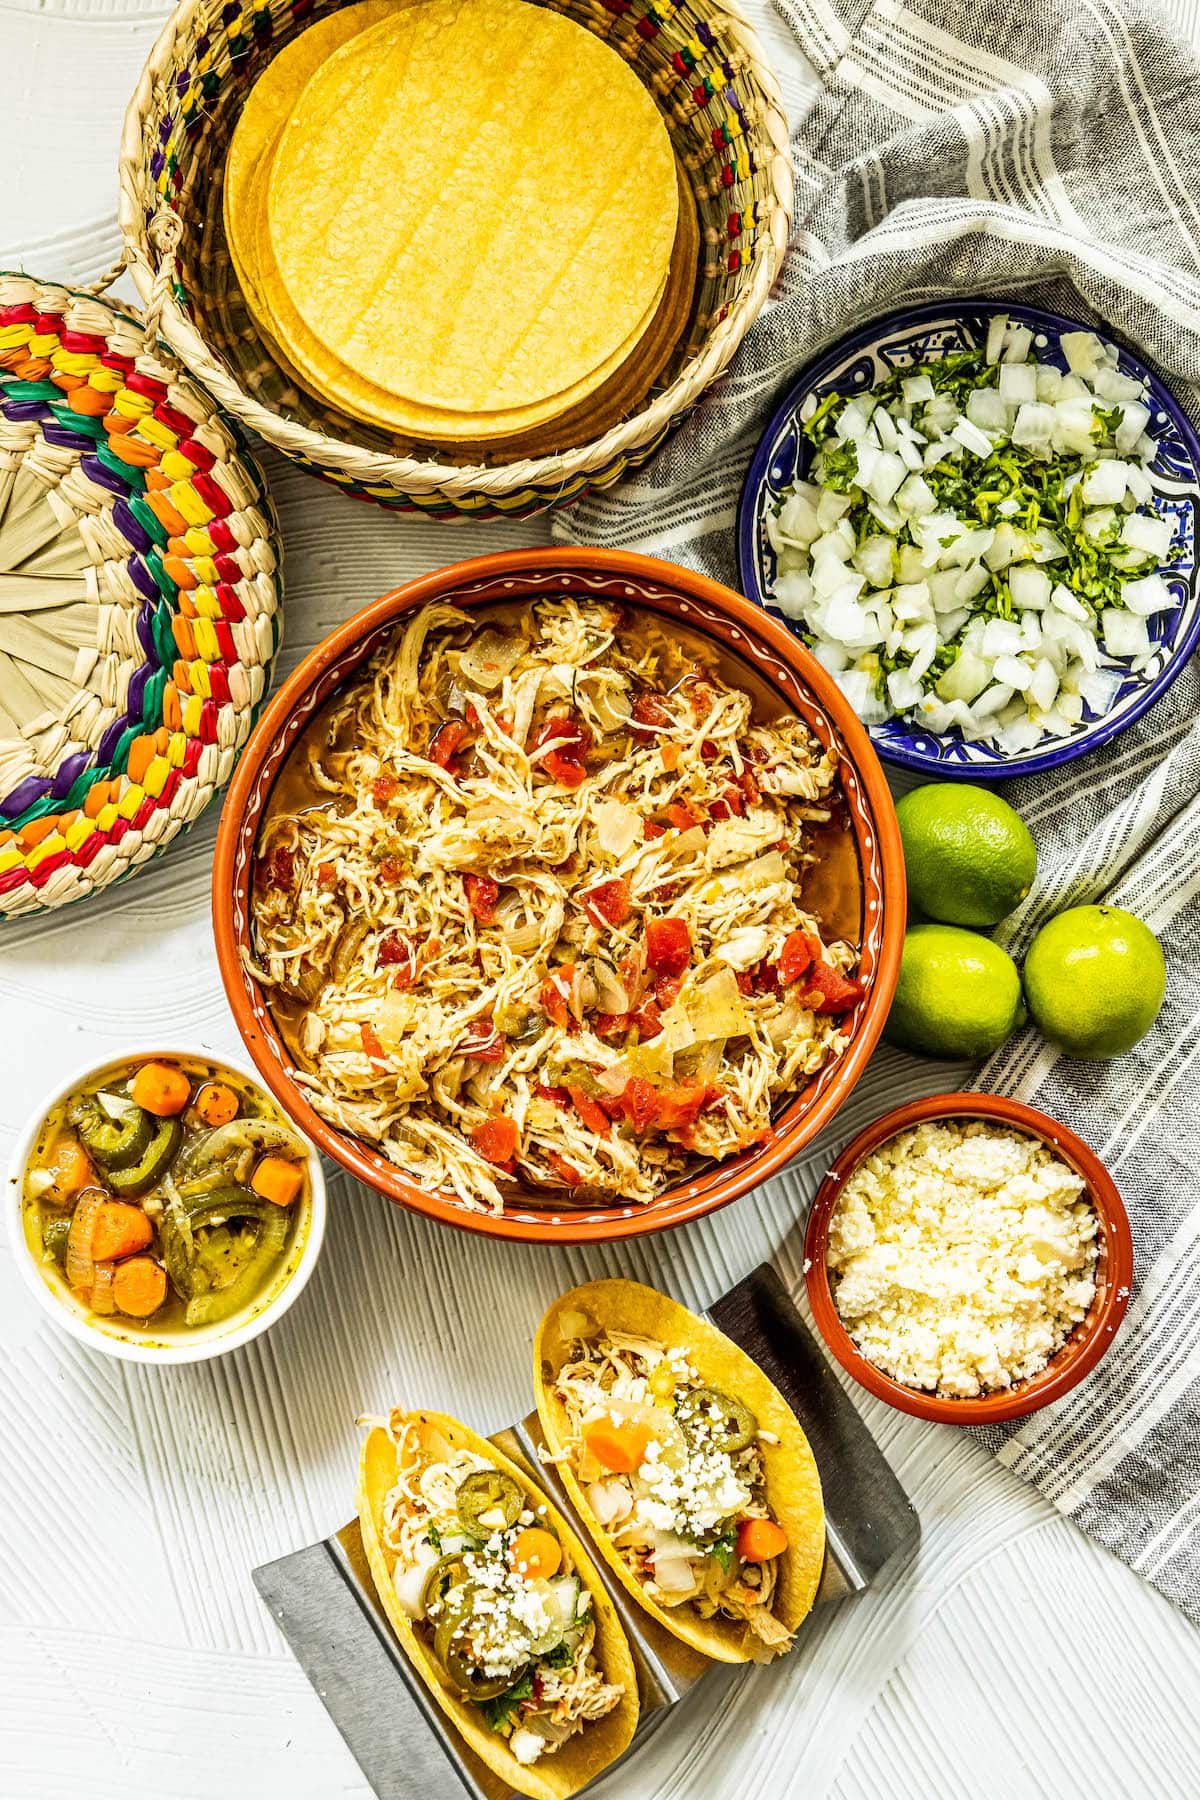 shredded chicken with tomatoes and green chile in a telavera bowl next to chicken tacos in a taco stand and a bowl of jalapeno and carrot salsa, a bowl of crumbled white cheese, some limes, a bowl of diced onions, and a bowl of tortillas on a table